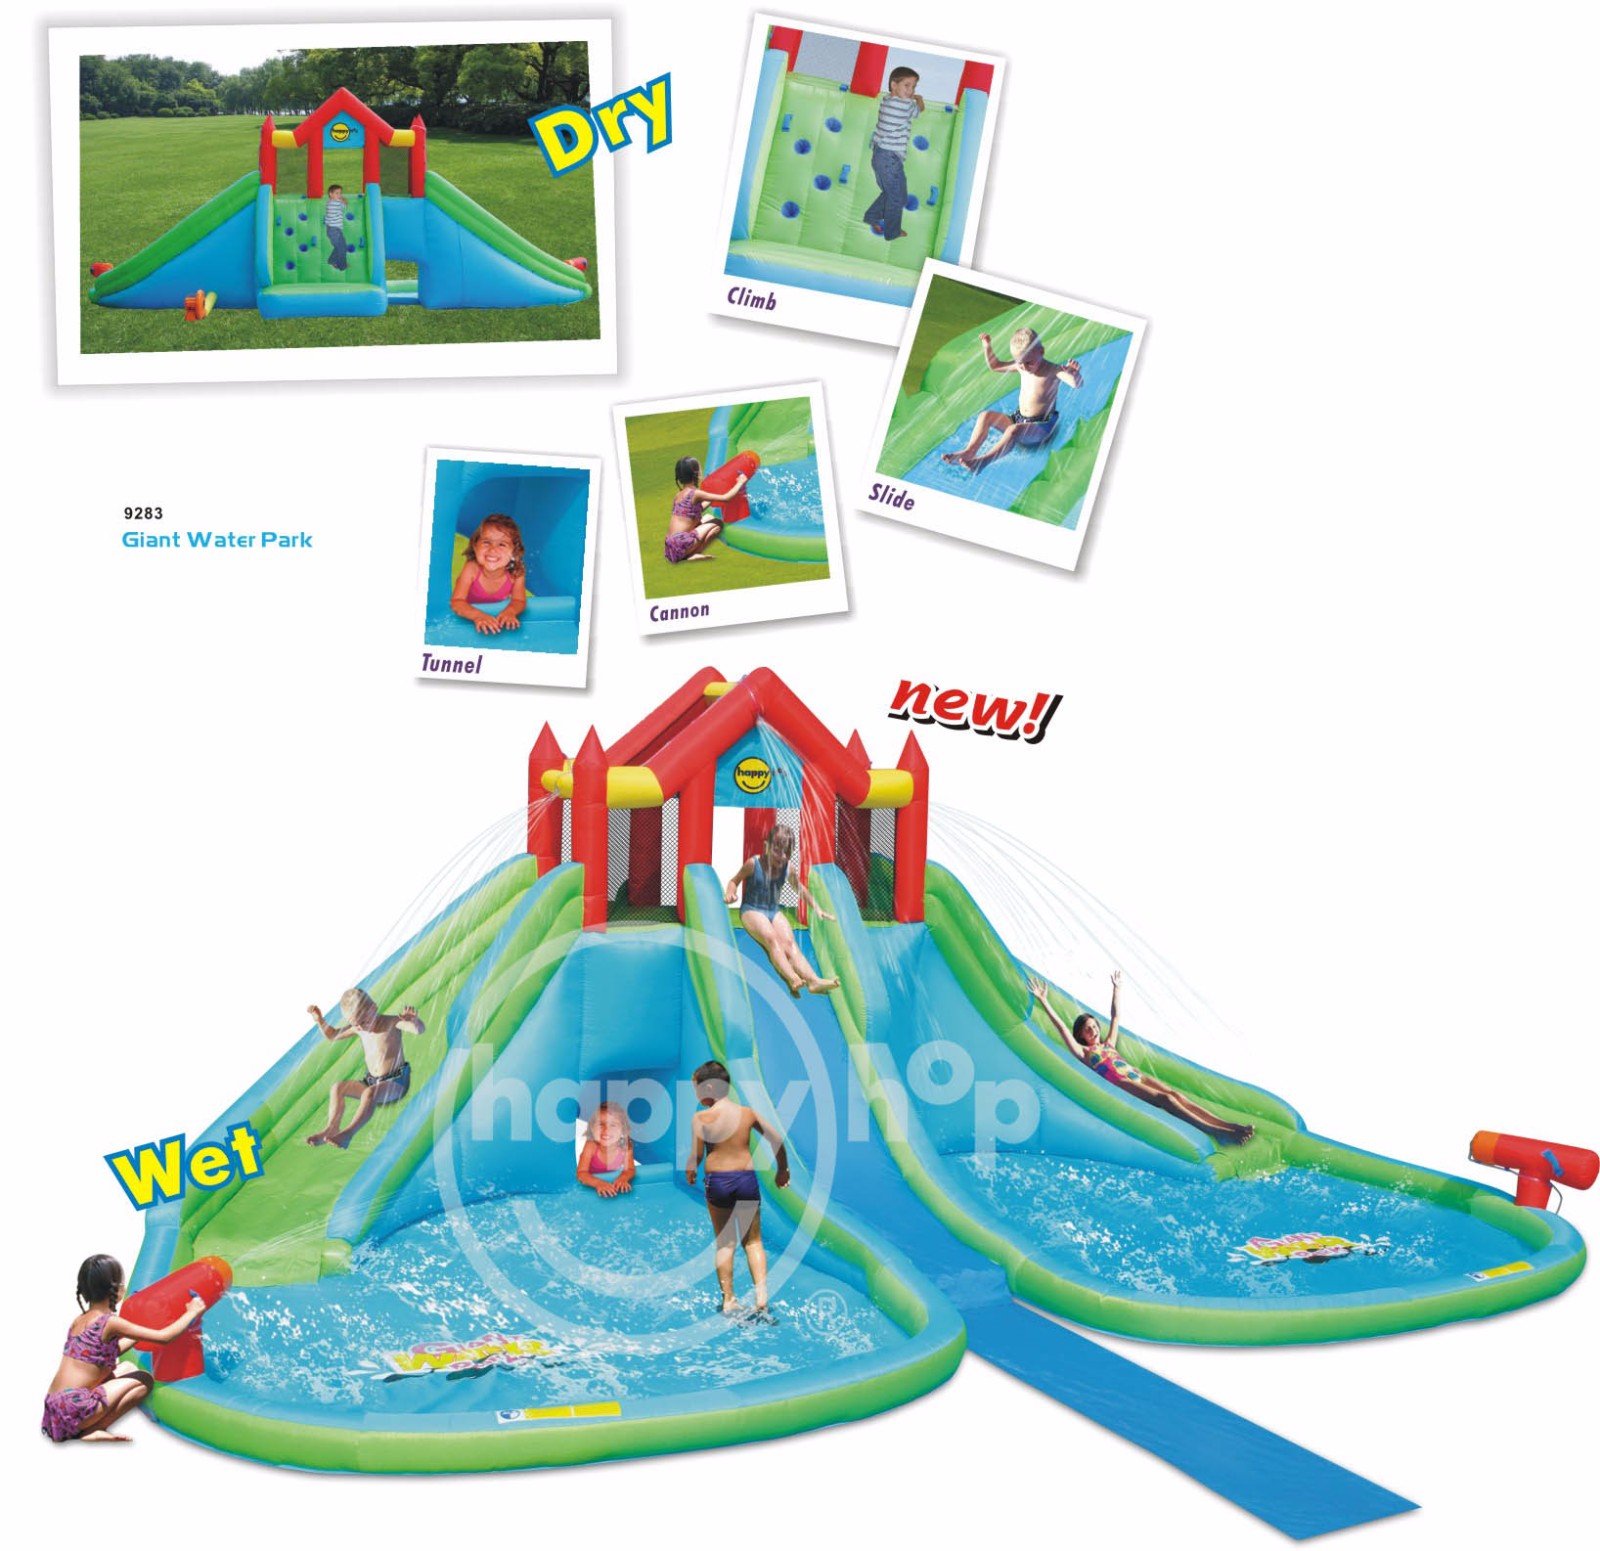 9283-Giant Water Park